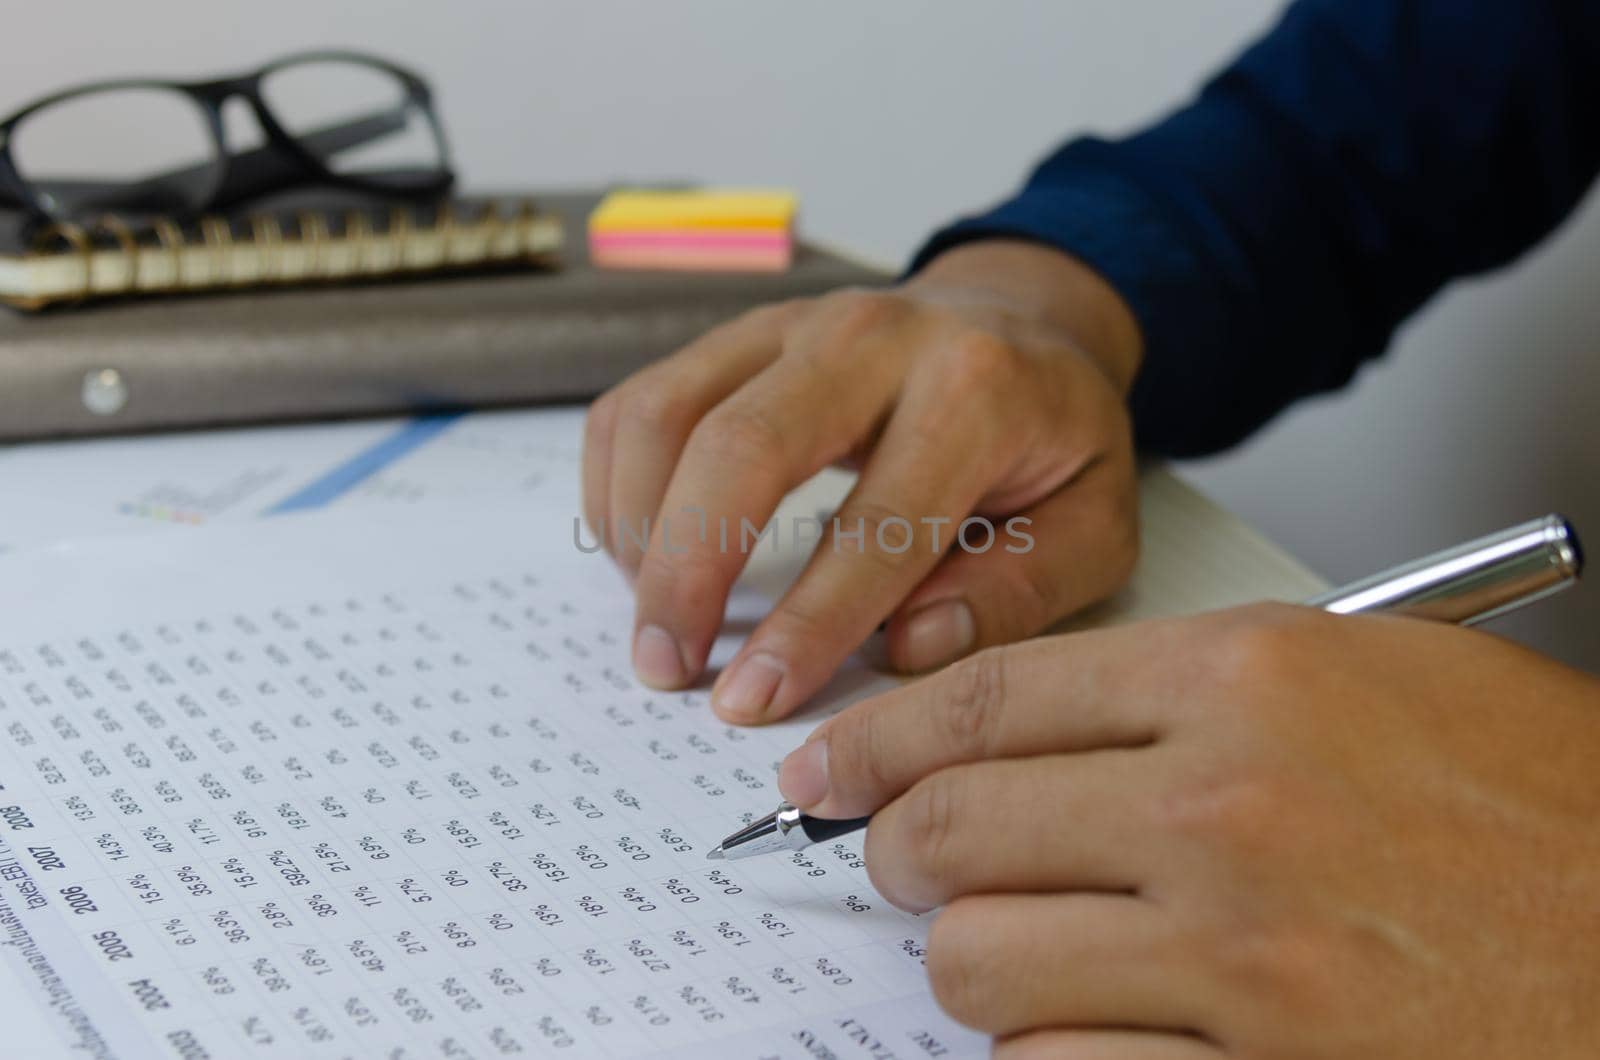 Man hand holding a pen and document paper work marketing financial plans Tax and business investment.